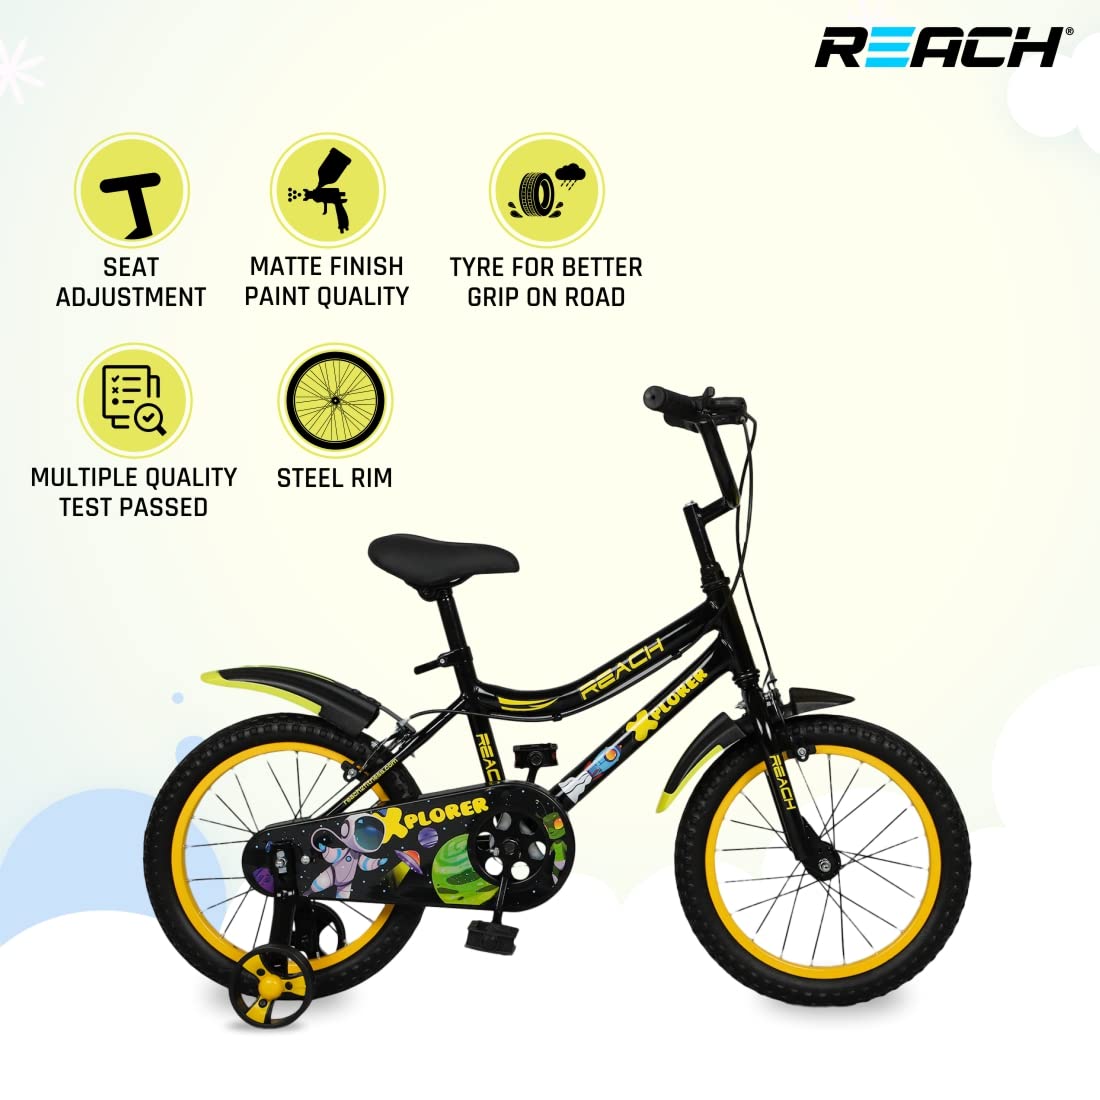 Reach Xplorer Kids Cycle 16T with Training Wheels | for Boys and Girls | 90% Assembled | Frame Size: 12" | Ideal for Height: 3 ft 8 inch+ | Ideal for Ages 4-8 Years